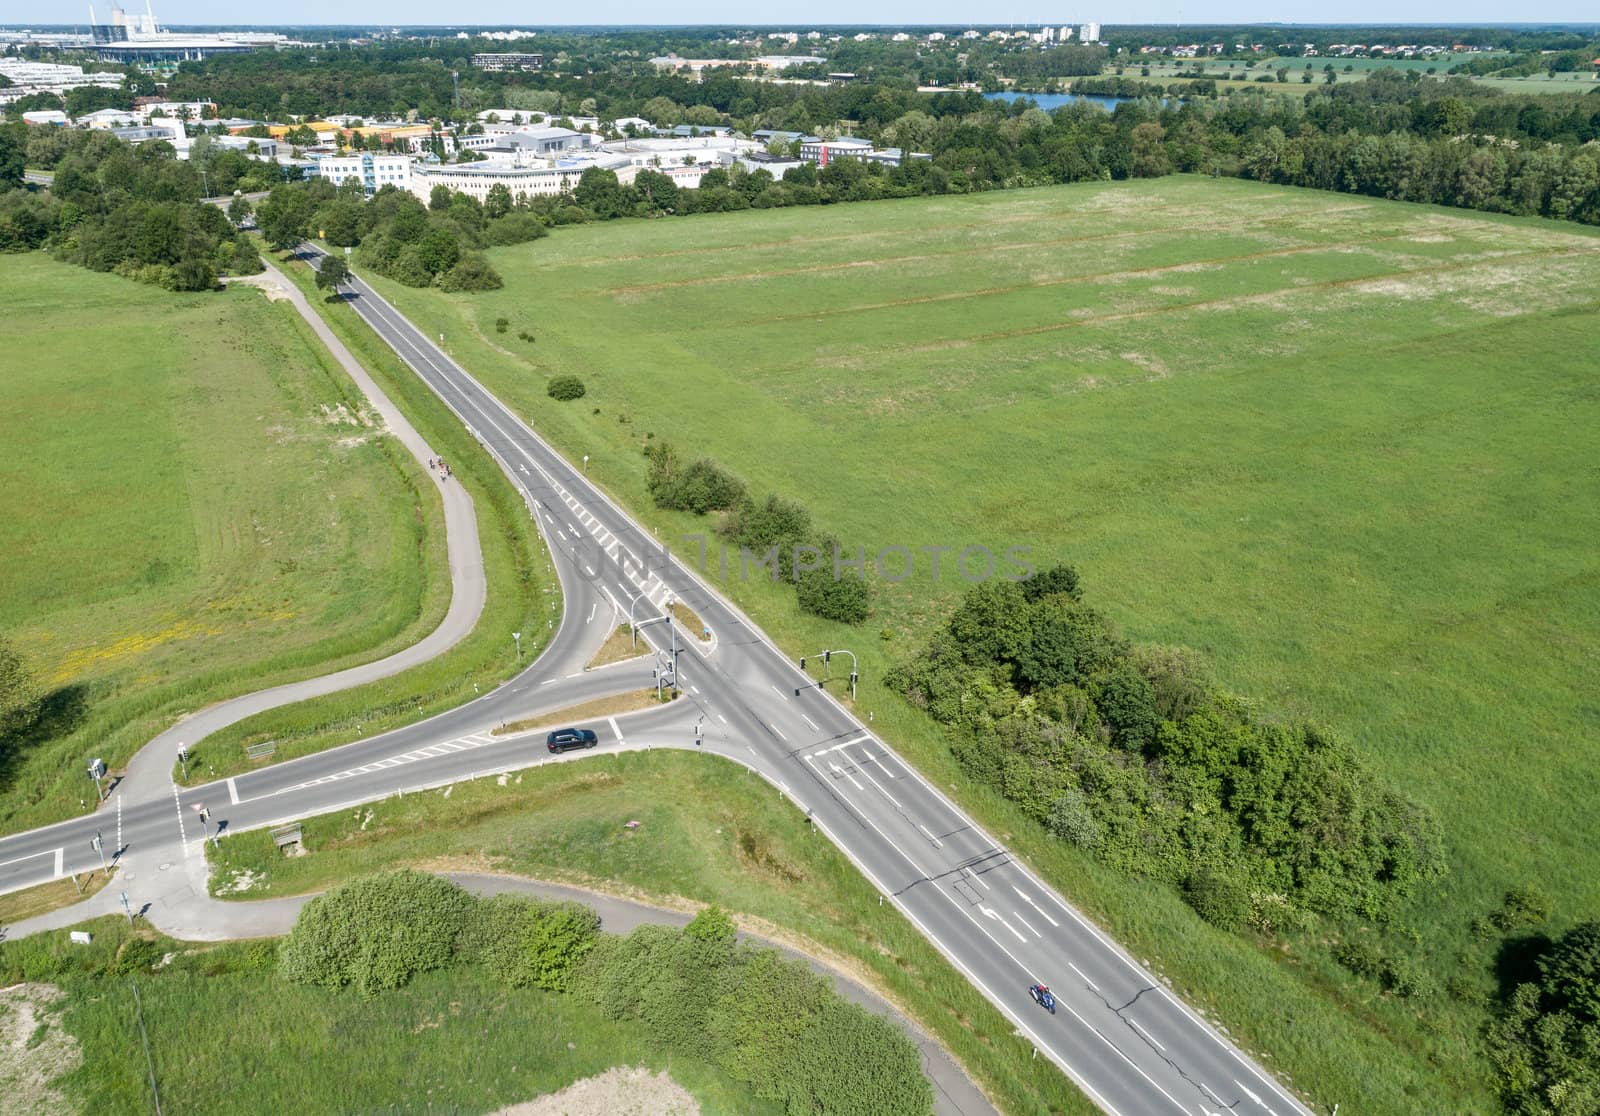 Aerial view of the turn-off of a ring road with the houses of the dominion in the background by geogif